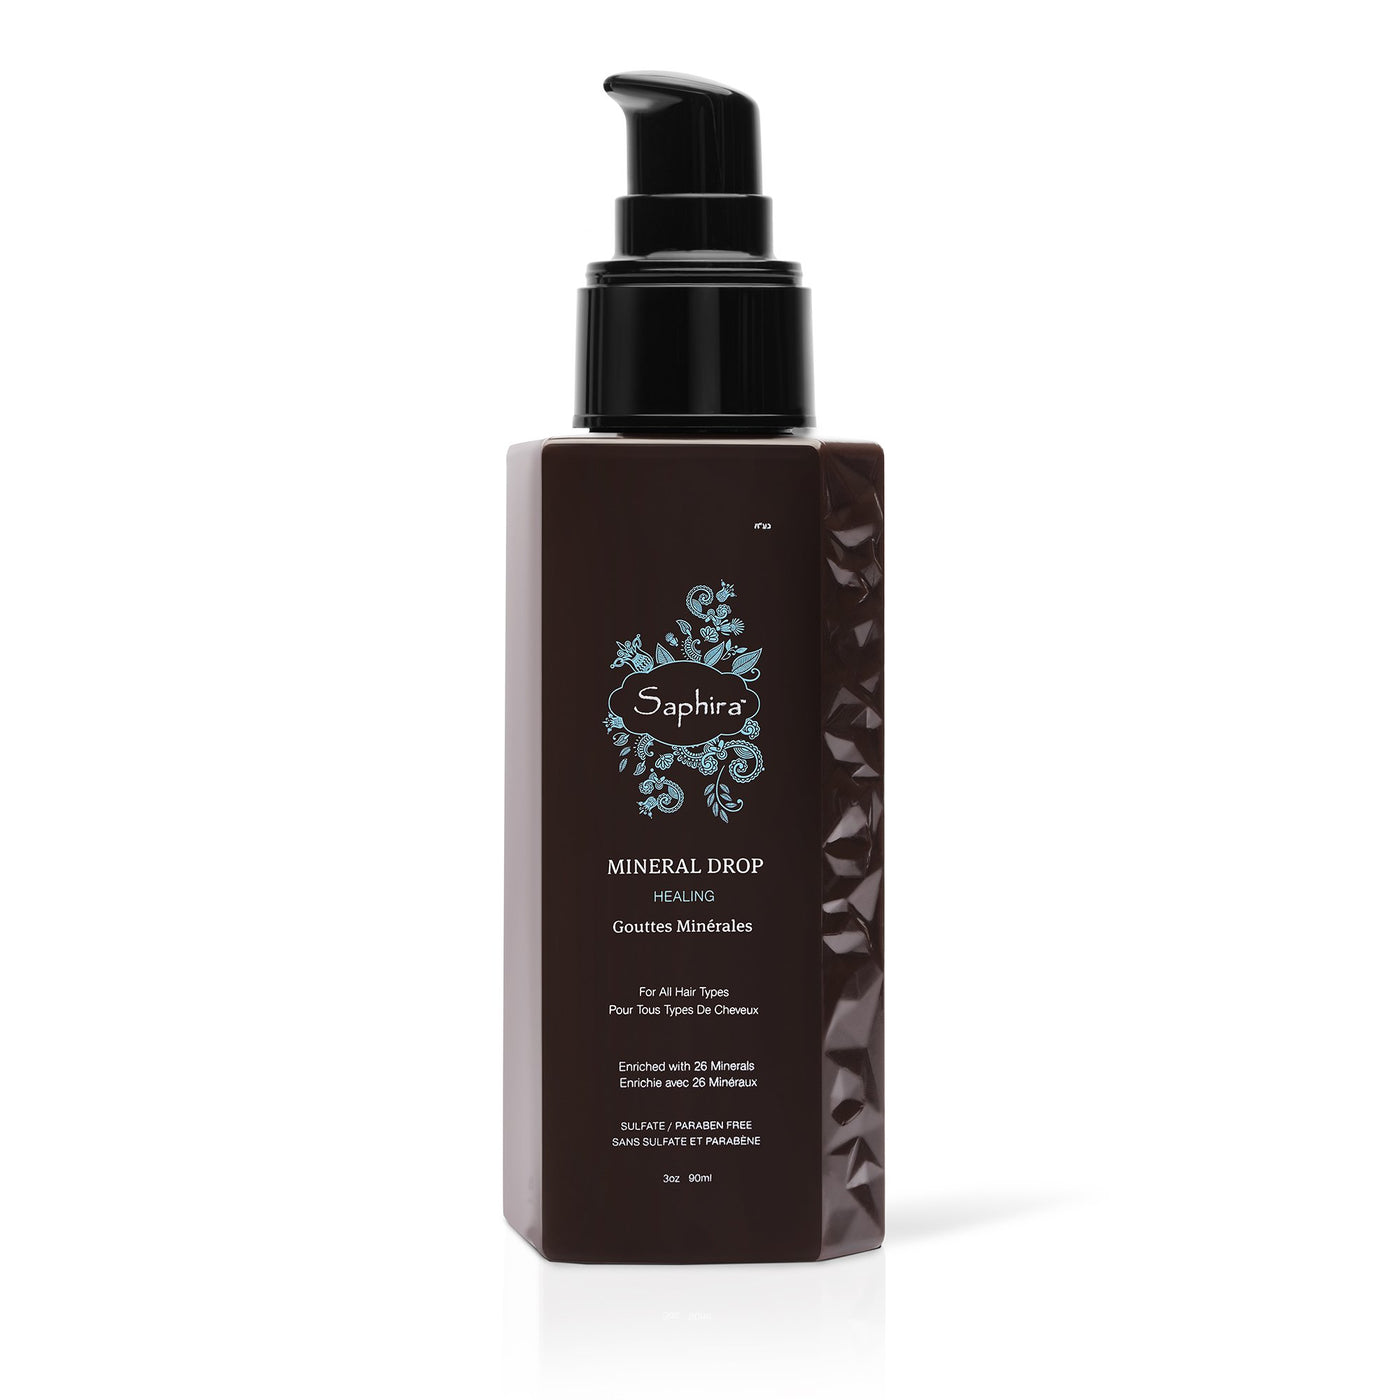 The Mineral Drop Hair Serum for Reduced Frizz